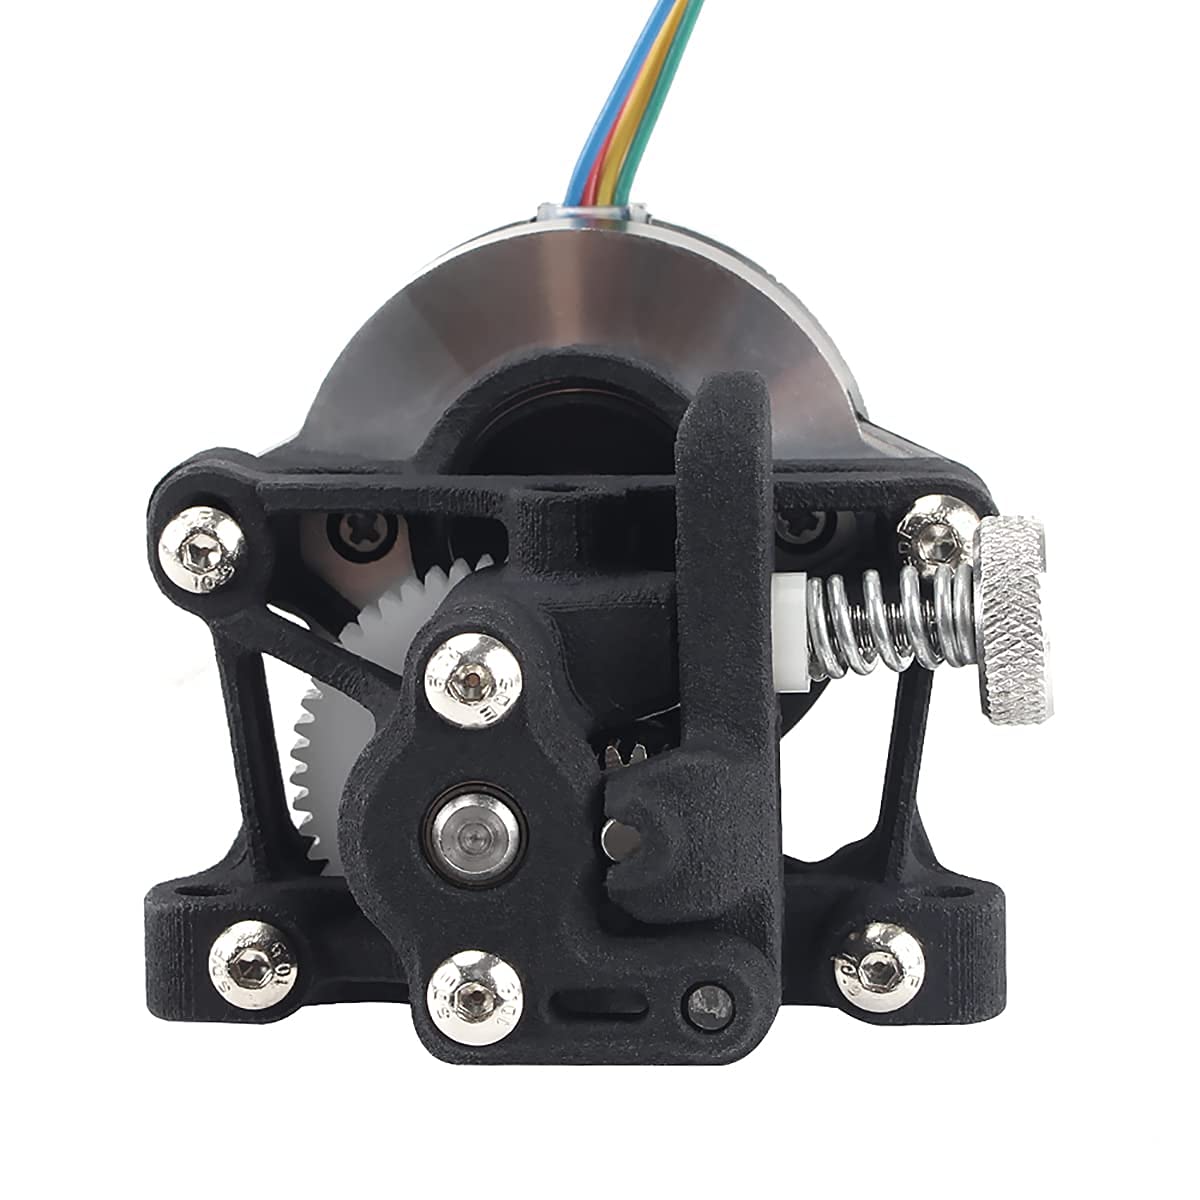 Annex Engineering Sherpa Mini Extruder - Light Weight BMG Extruder Compatible with Ender3 CR10 CR6 TEVO 3D Printers